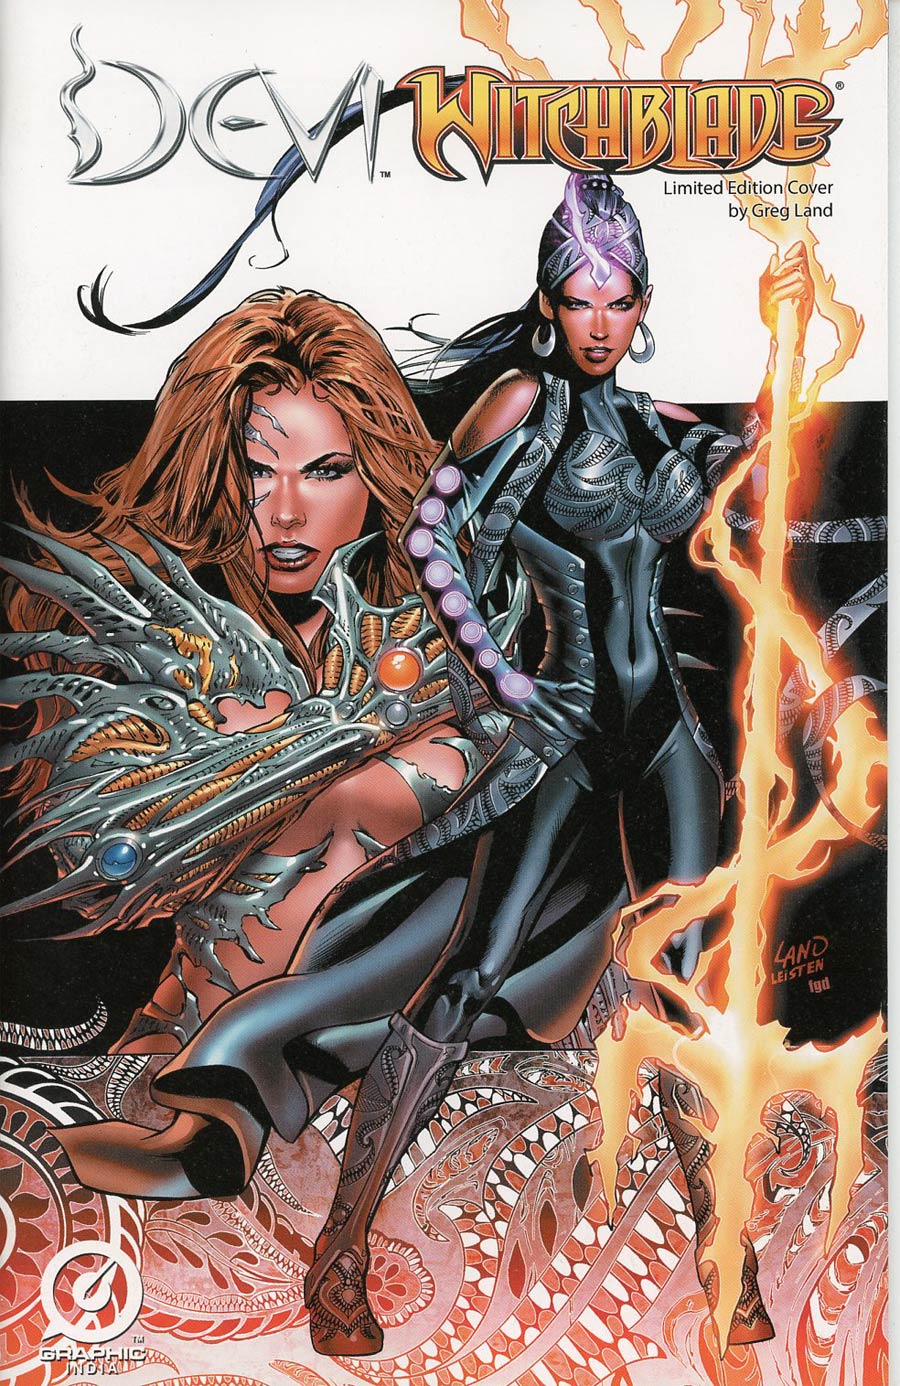 Devi Witchblade One Shot Cover C Variant Greg Land Limited Edition Cover